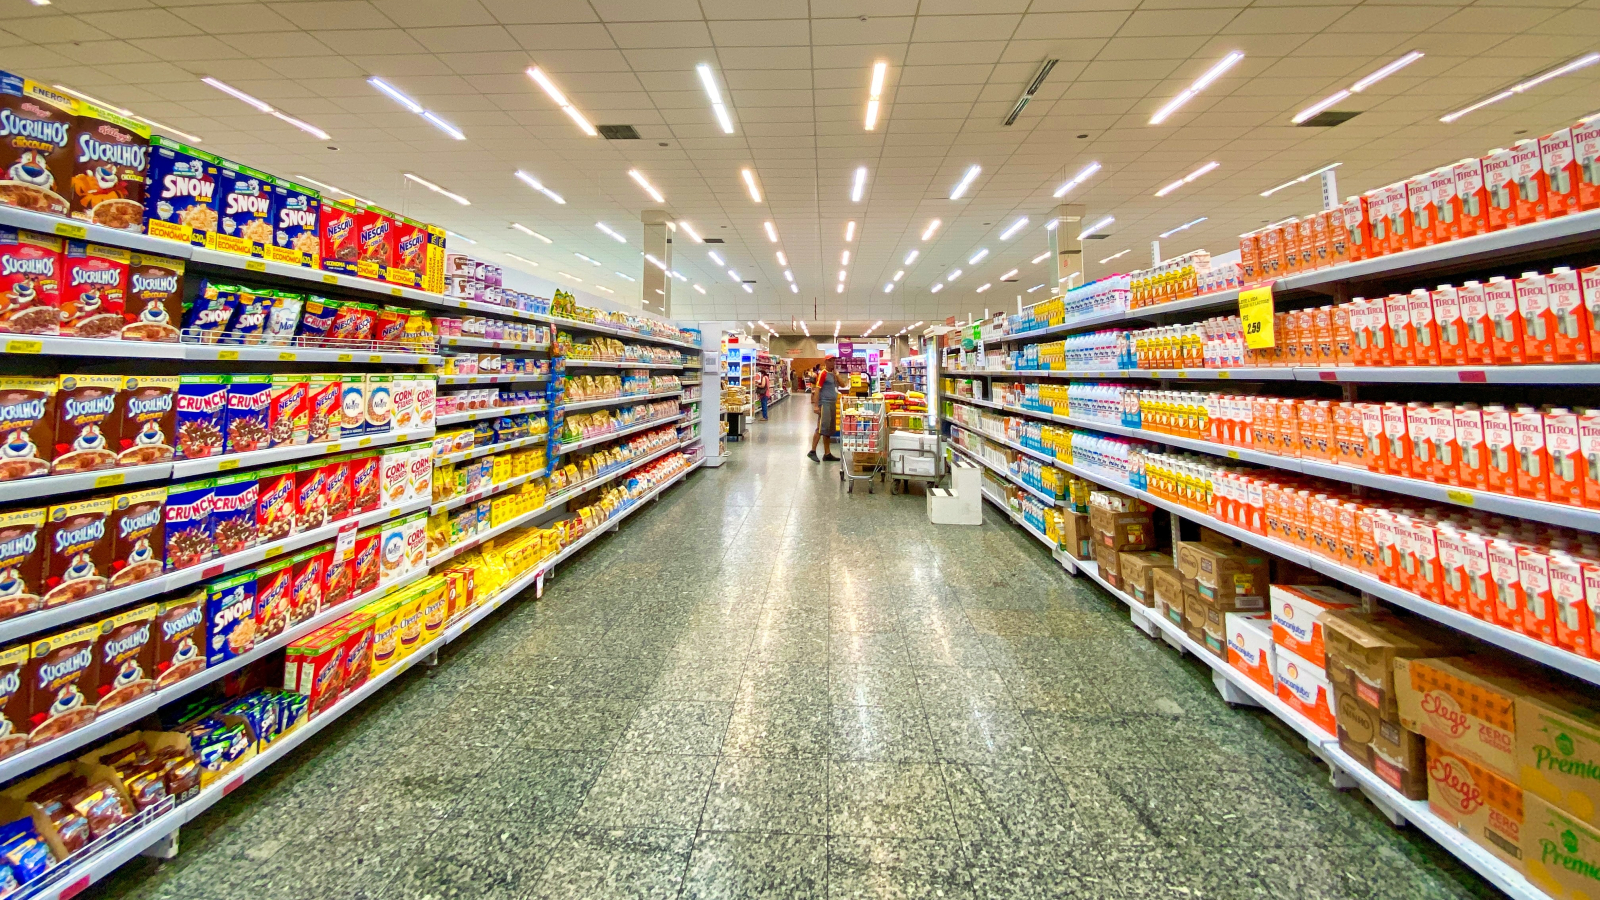 The Pros and Cons of the Endless Aisle